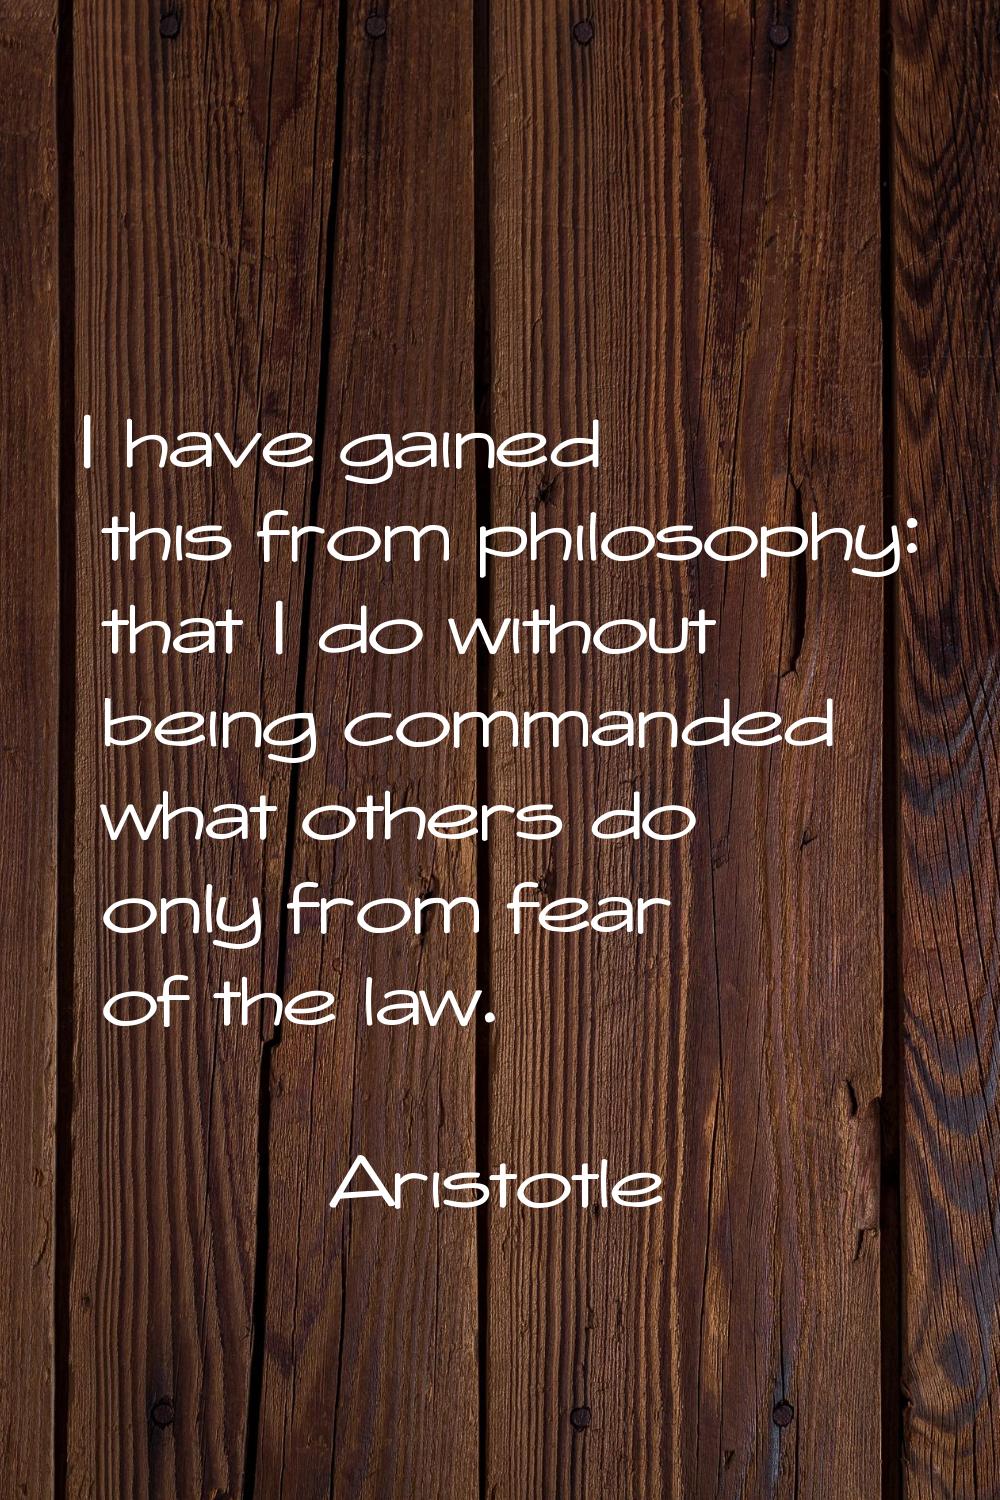 I have gained this from philosophy: that I do without being commanded what others do only from fear